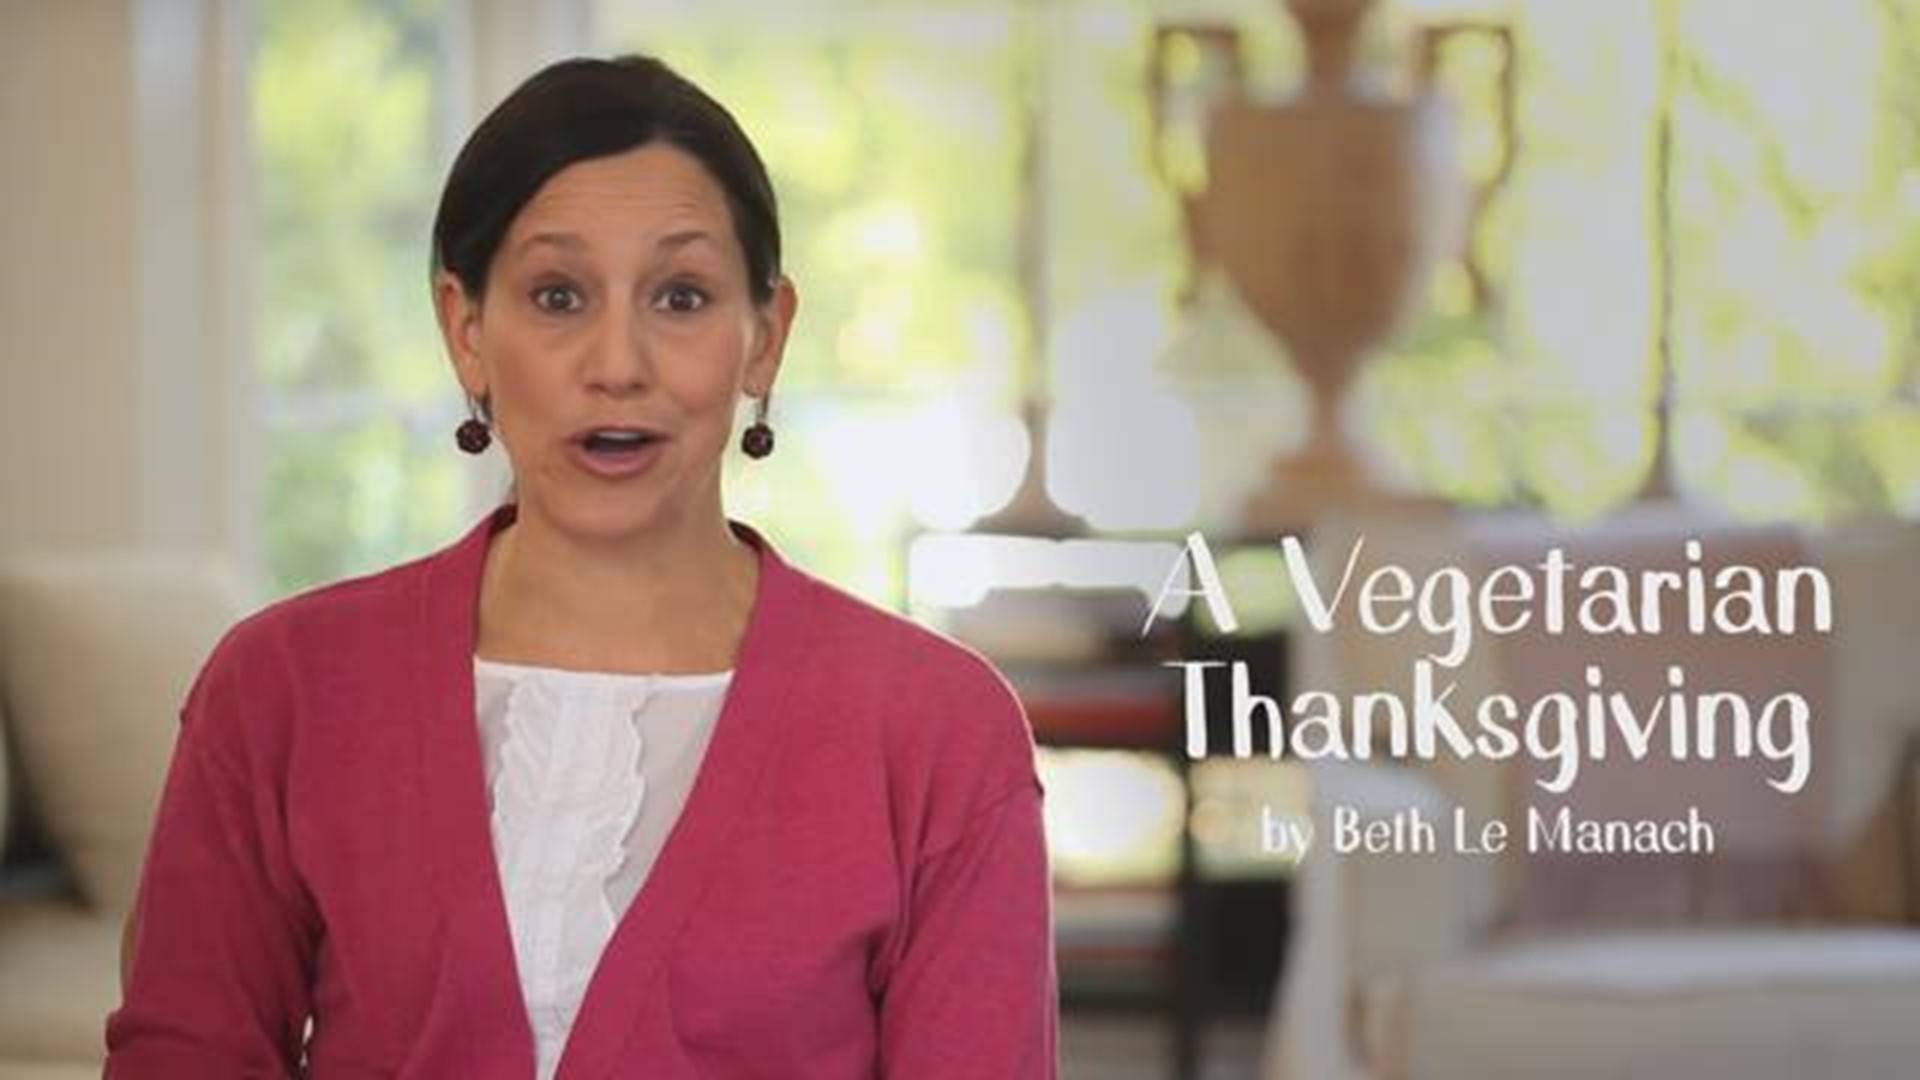 Beth shares her recipes for a Vegetarian Thanksgiving Feast.